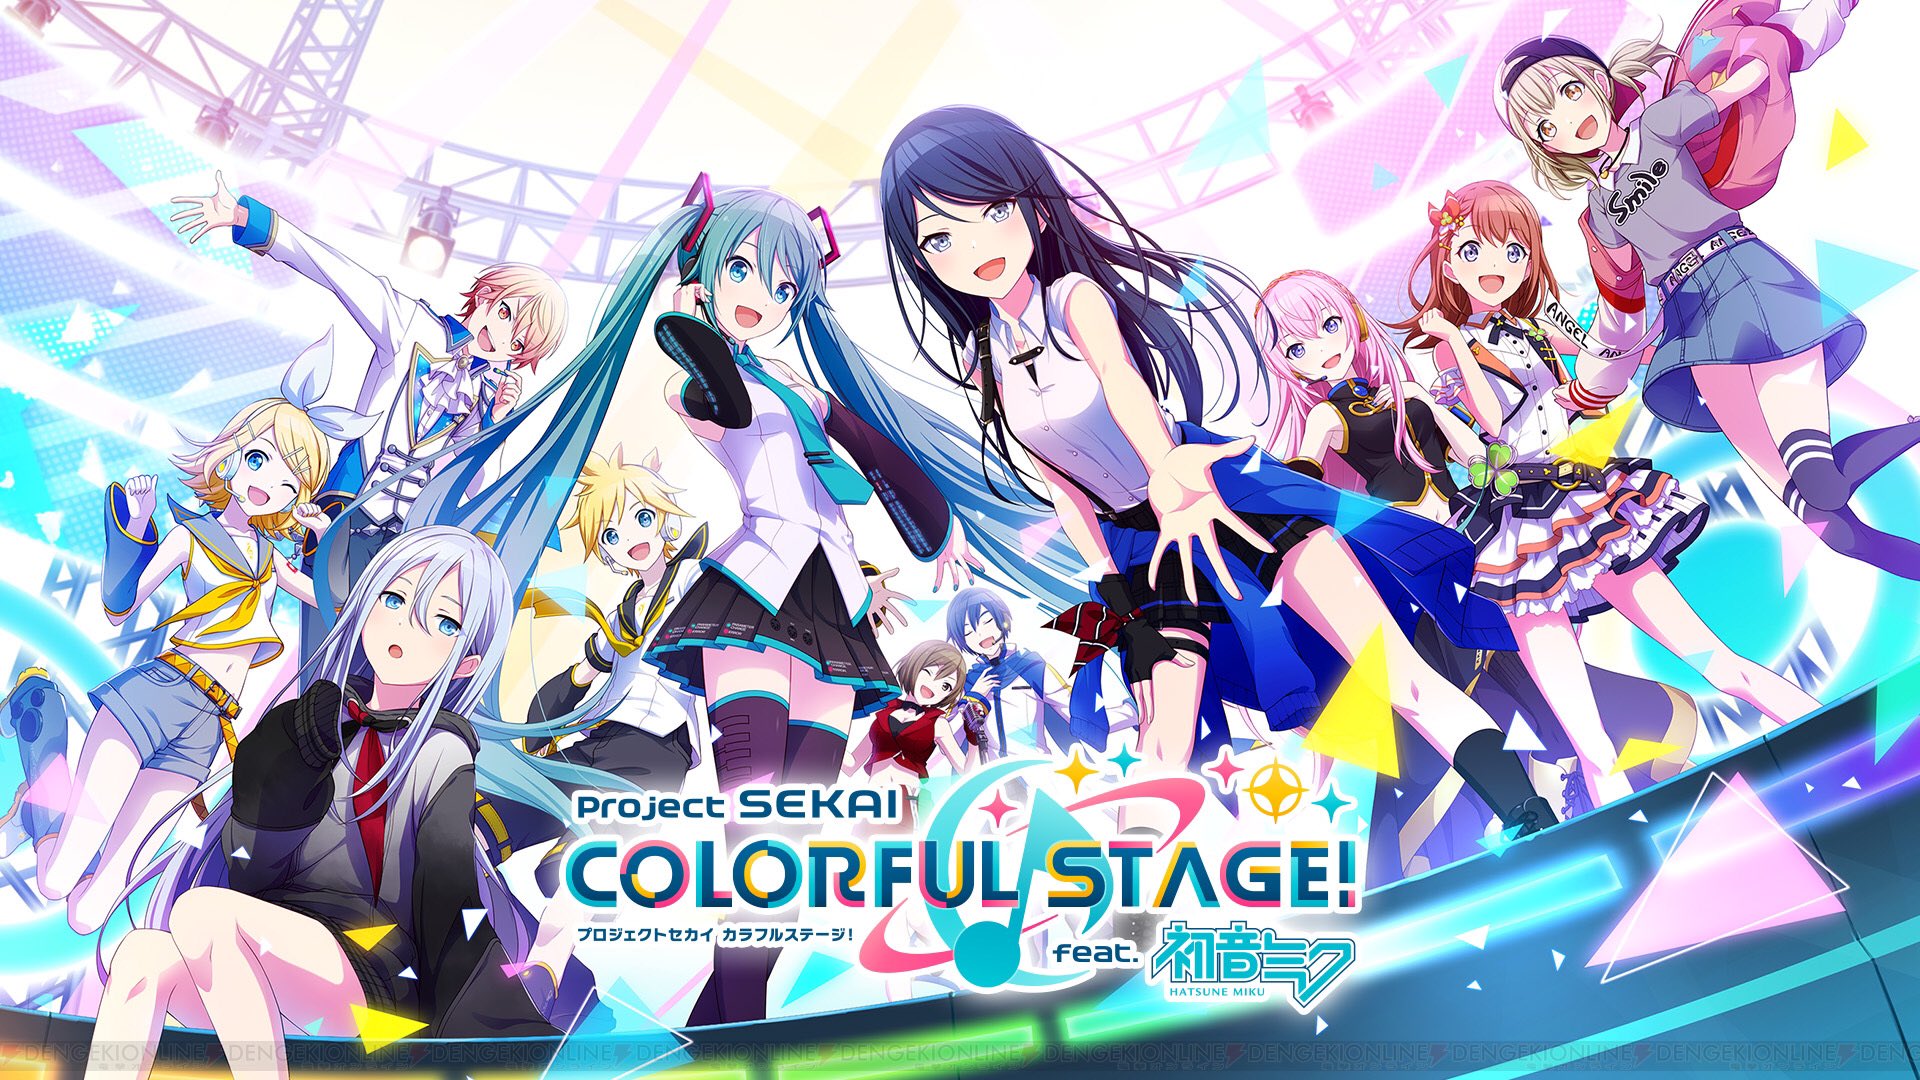 SEGA’s Hatsune Miku: Colorful Stage will be globally releasing later this year on Android